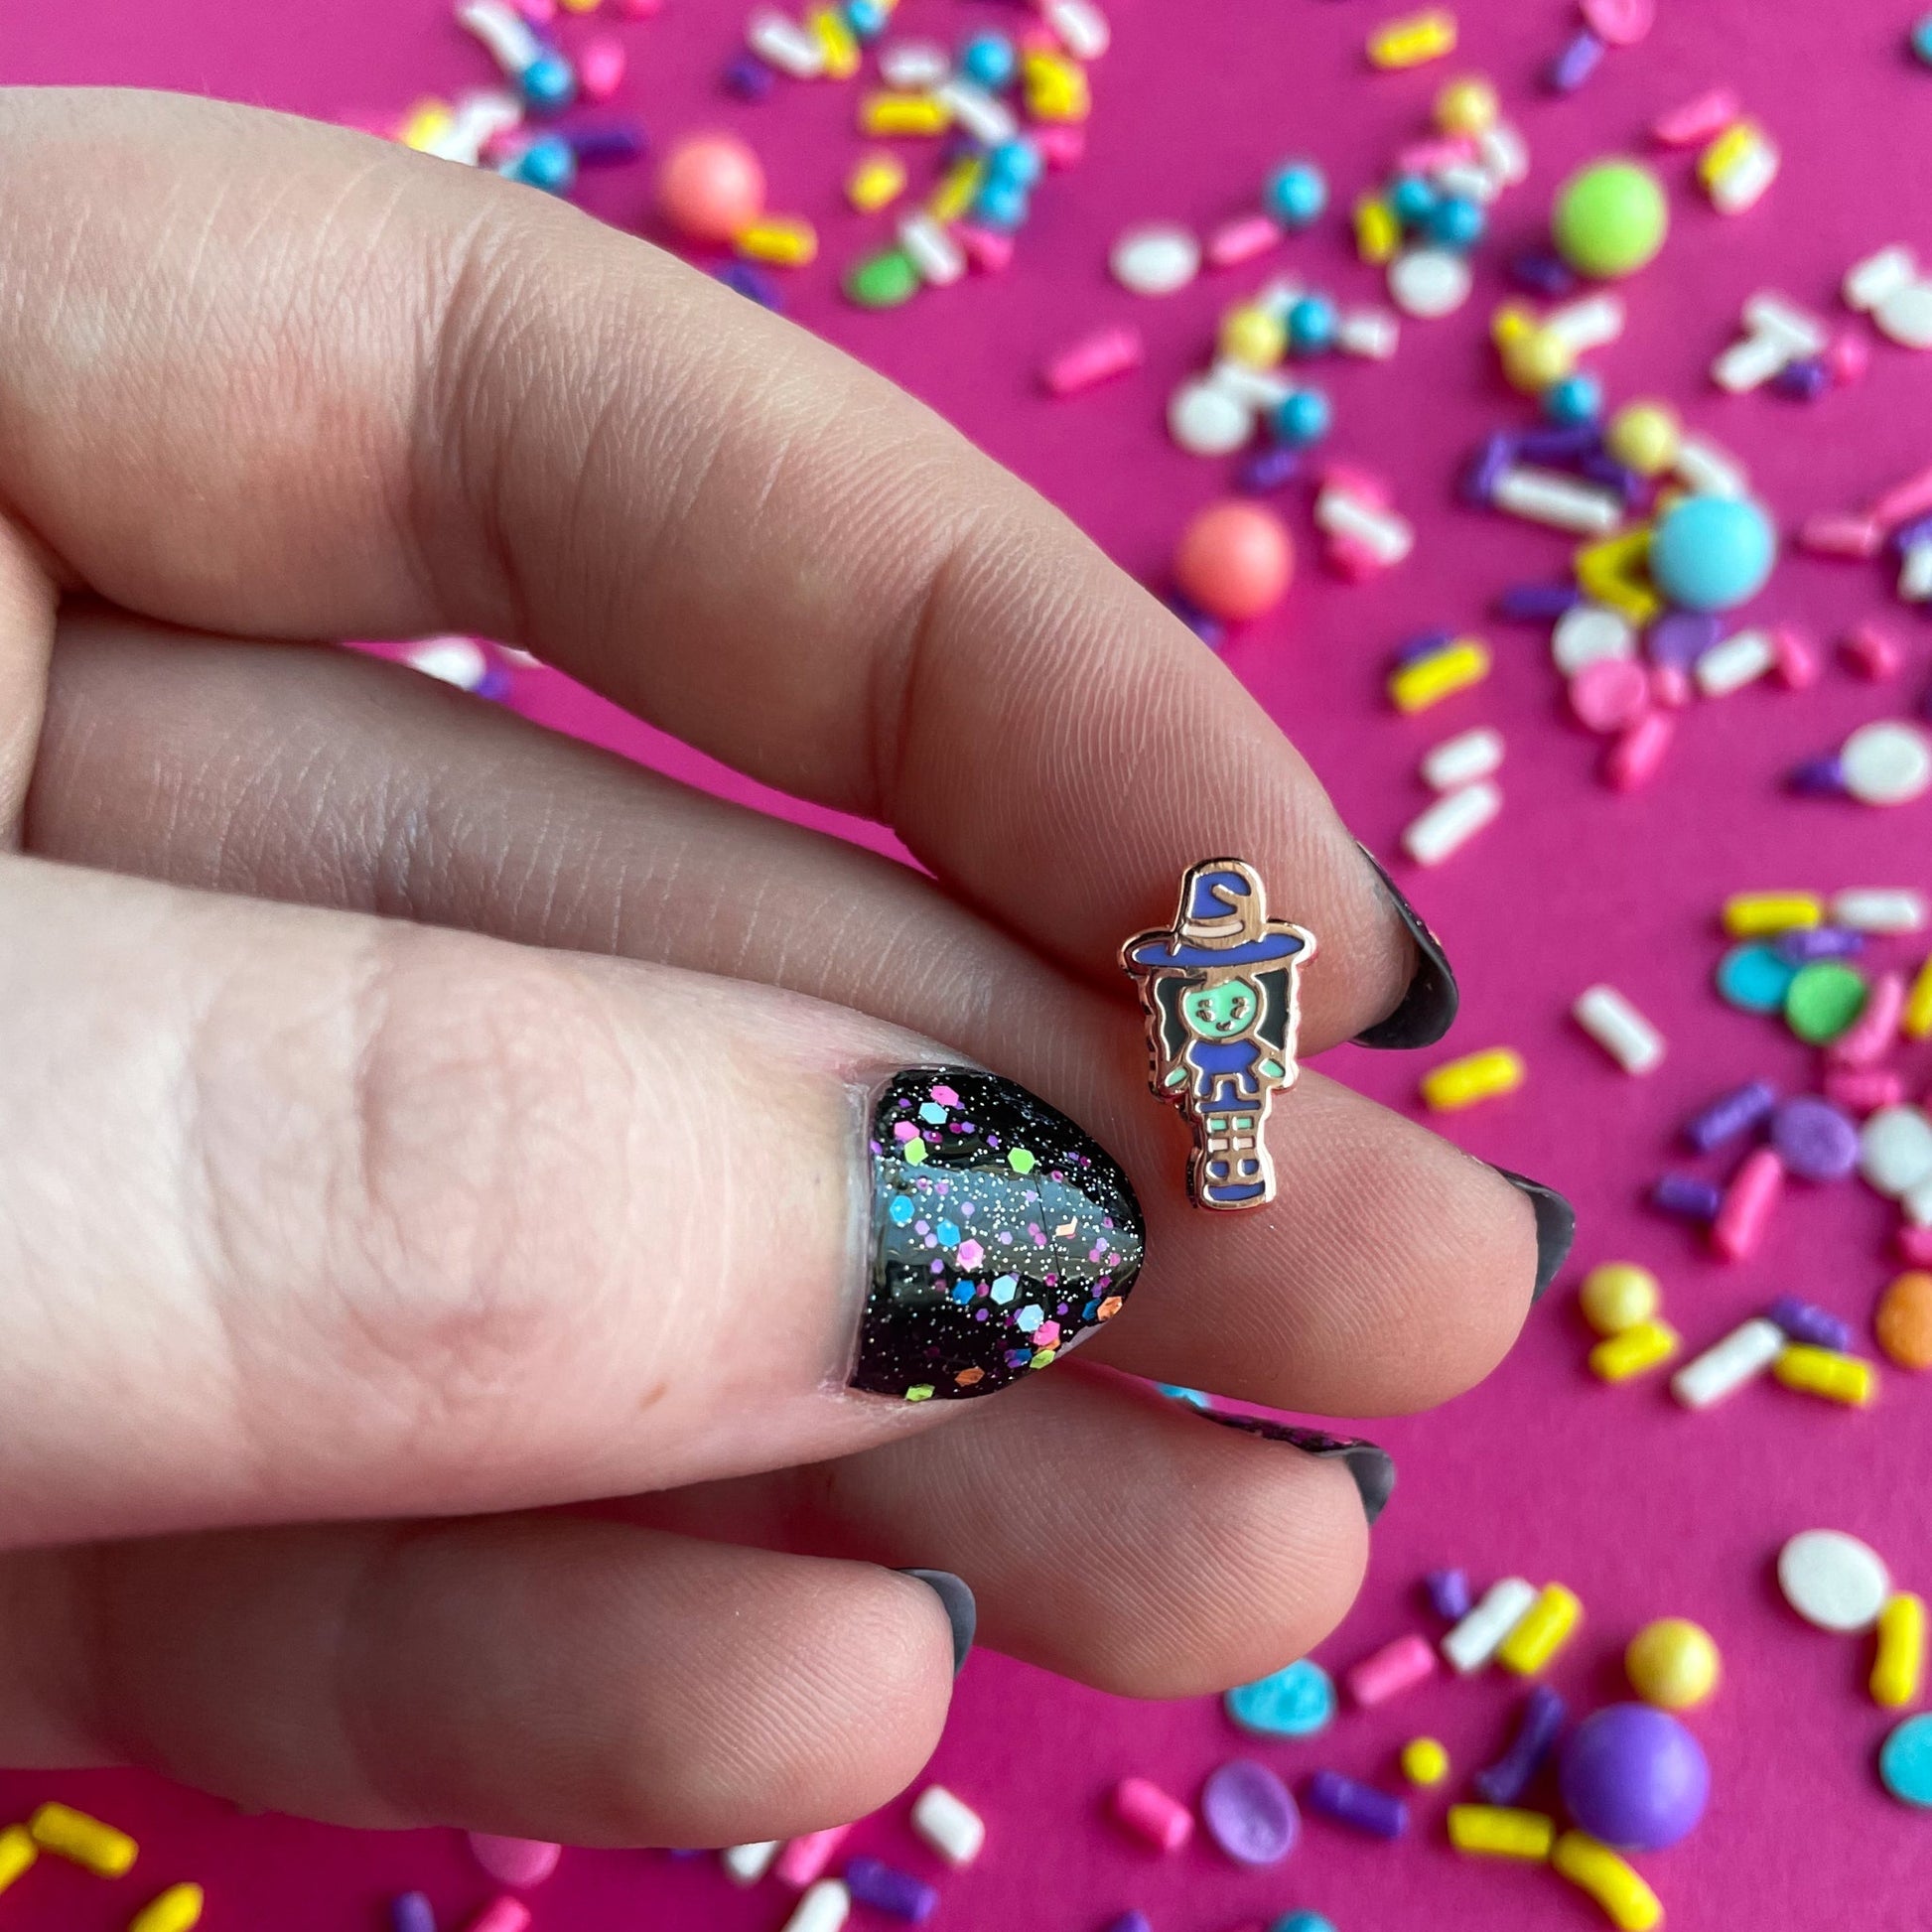 A close up of a hand with black and confetti painted nails holding the Witchy Pocket pin. She is a small polly pocket style doll about the size of a fingernail. She is wearing a purple dress and hat. She has green skin.